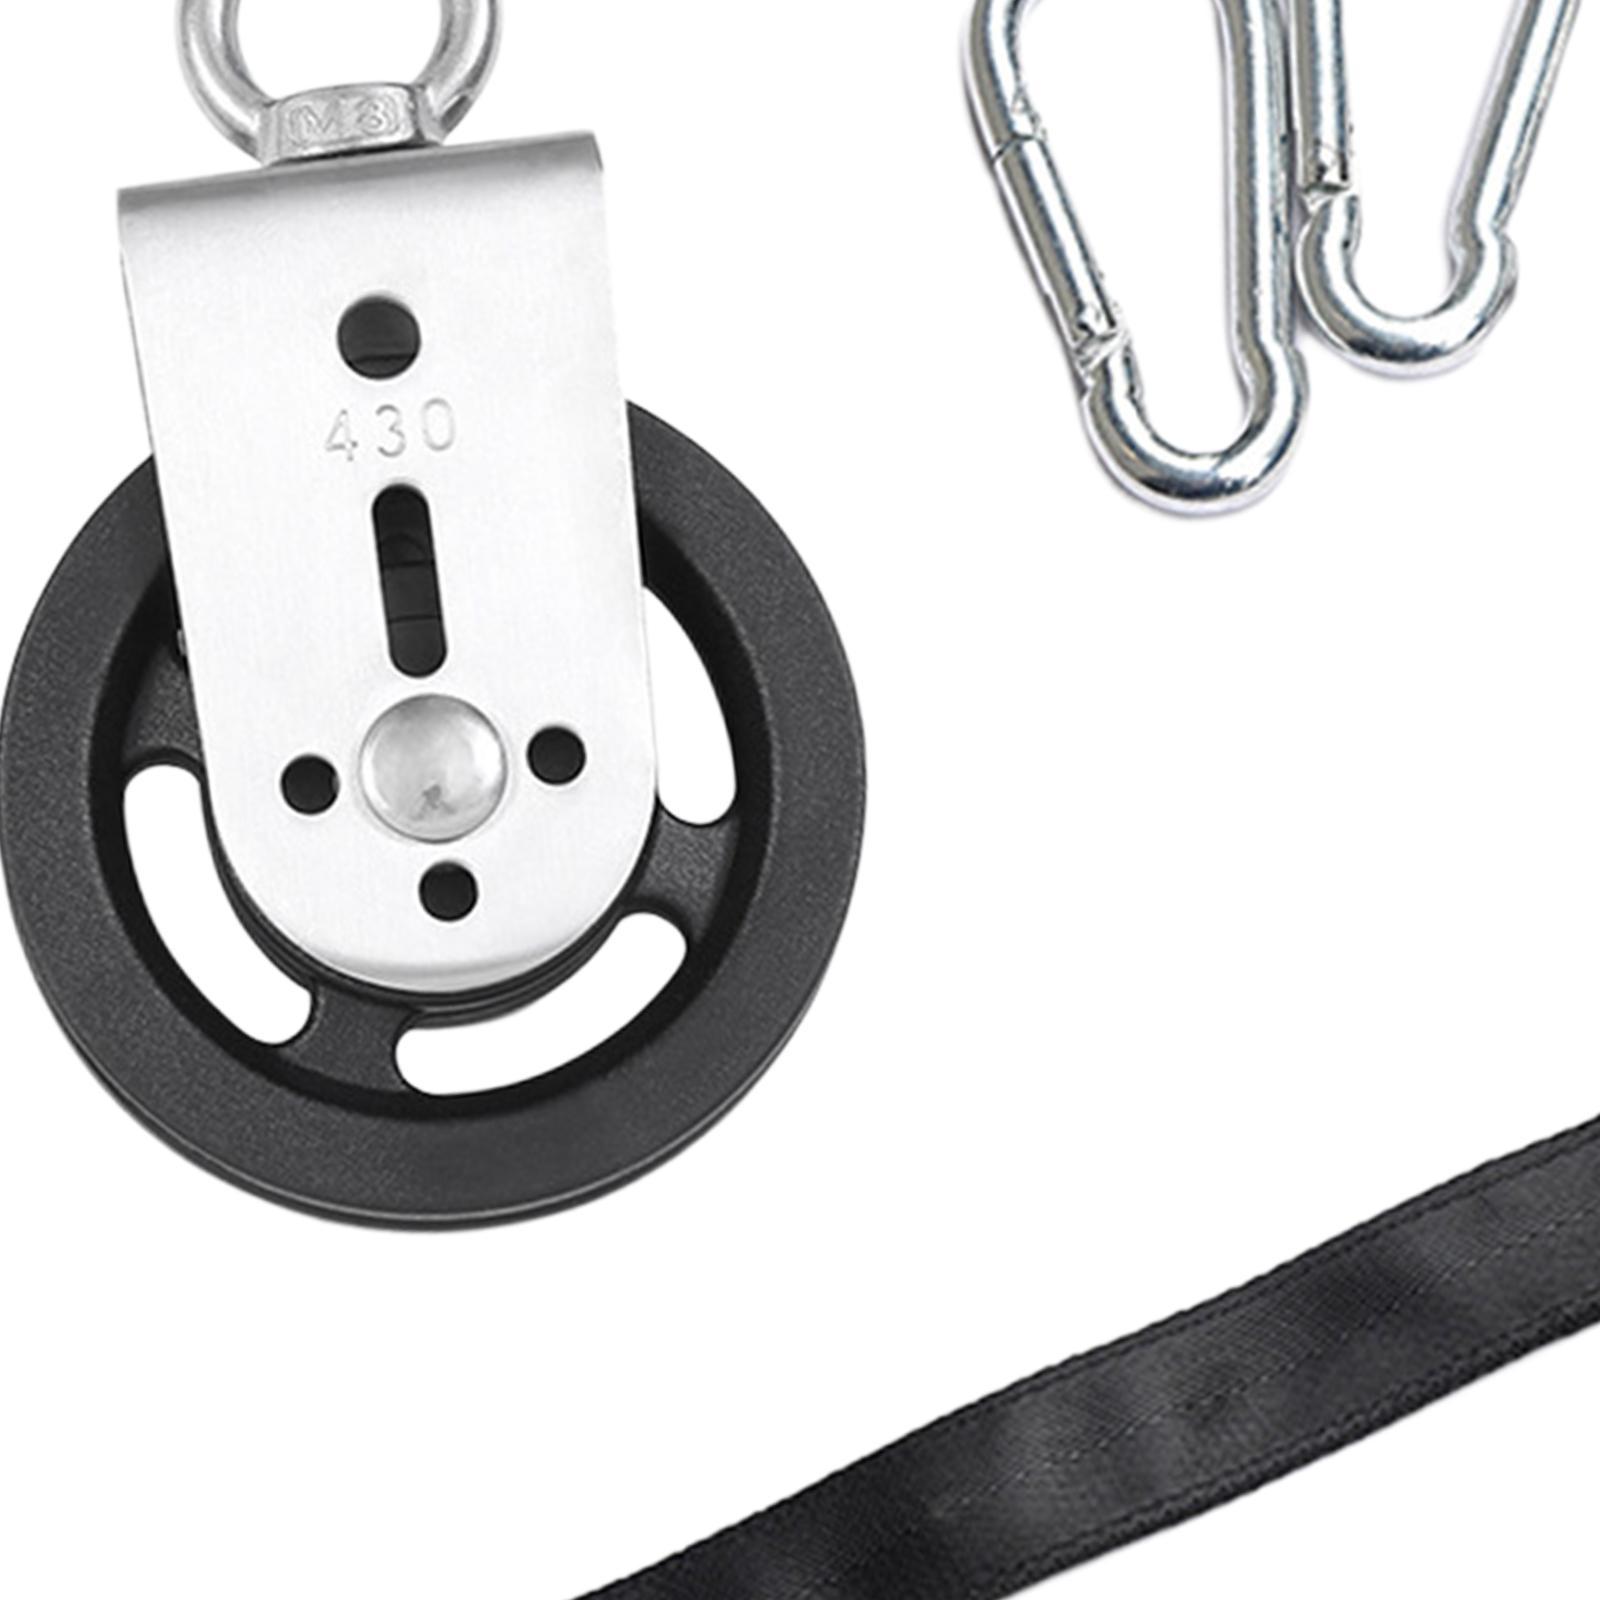 Gym Pulley Wheel Set Sturdy for Wire Rope Crane Traction Workout Ladder